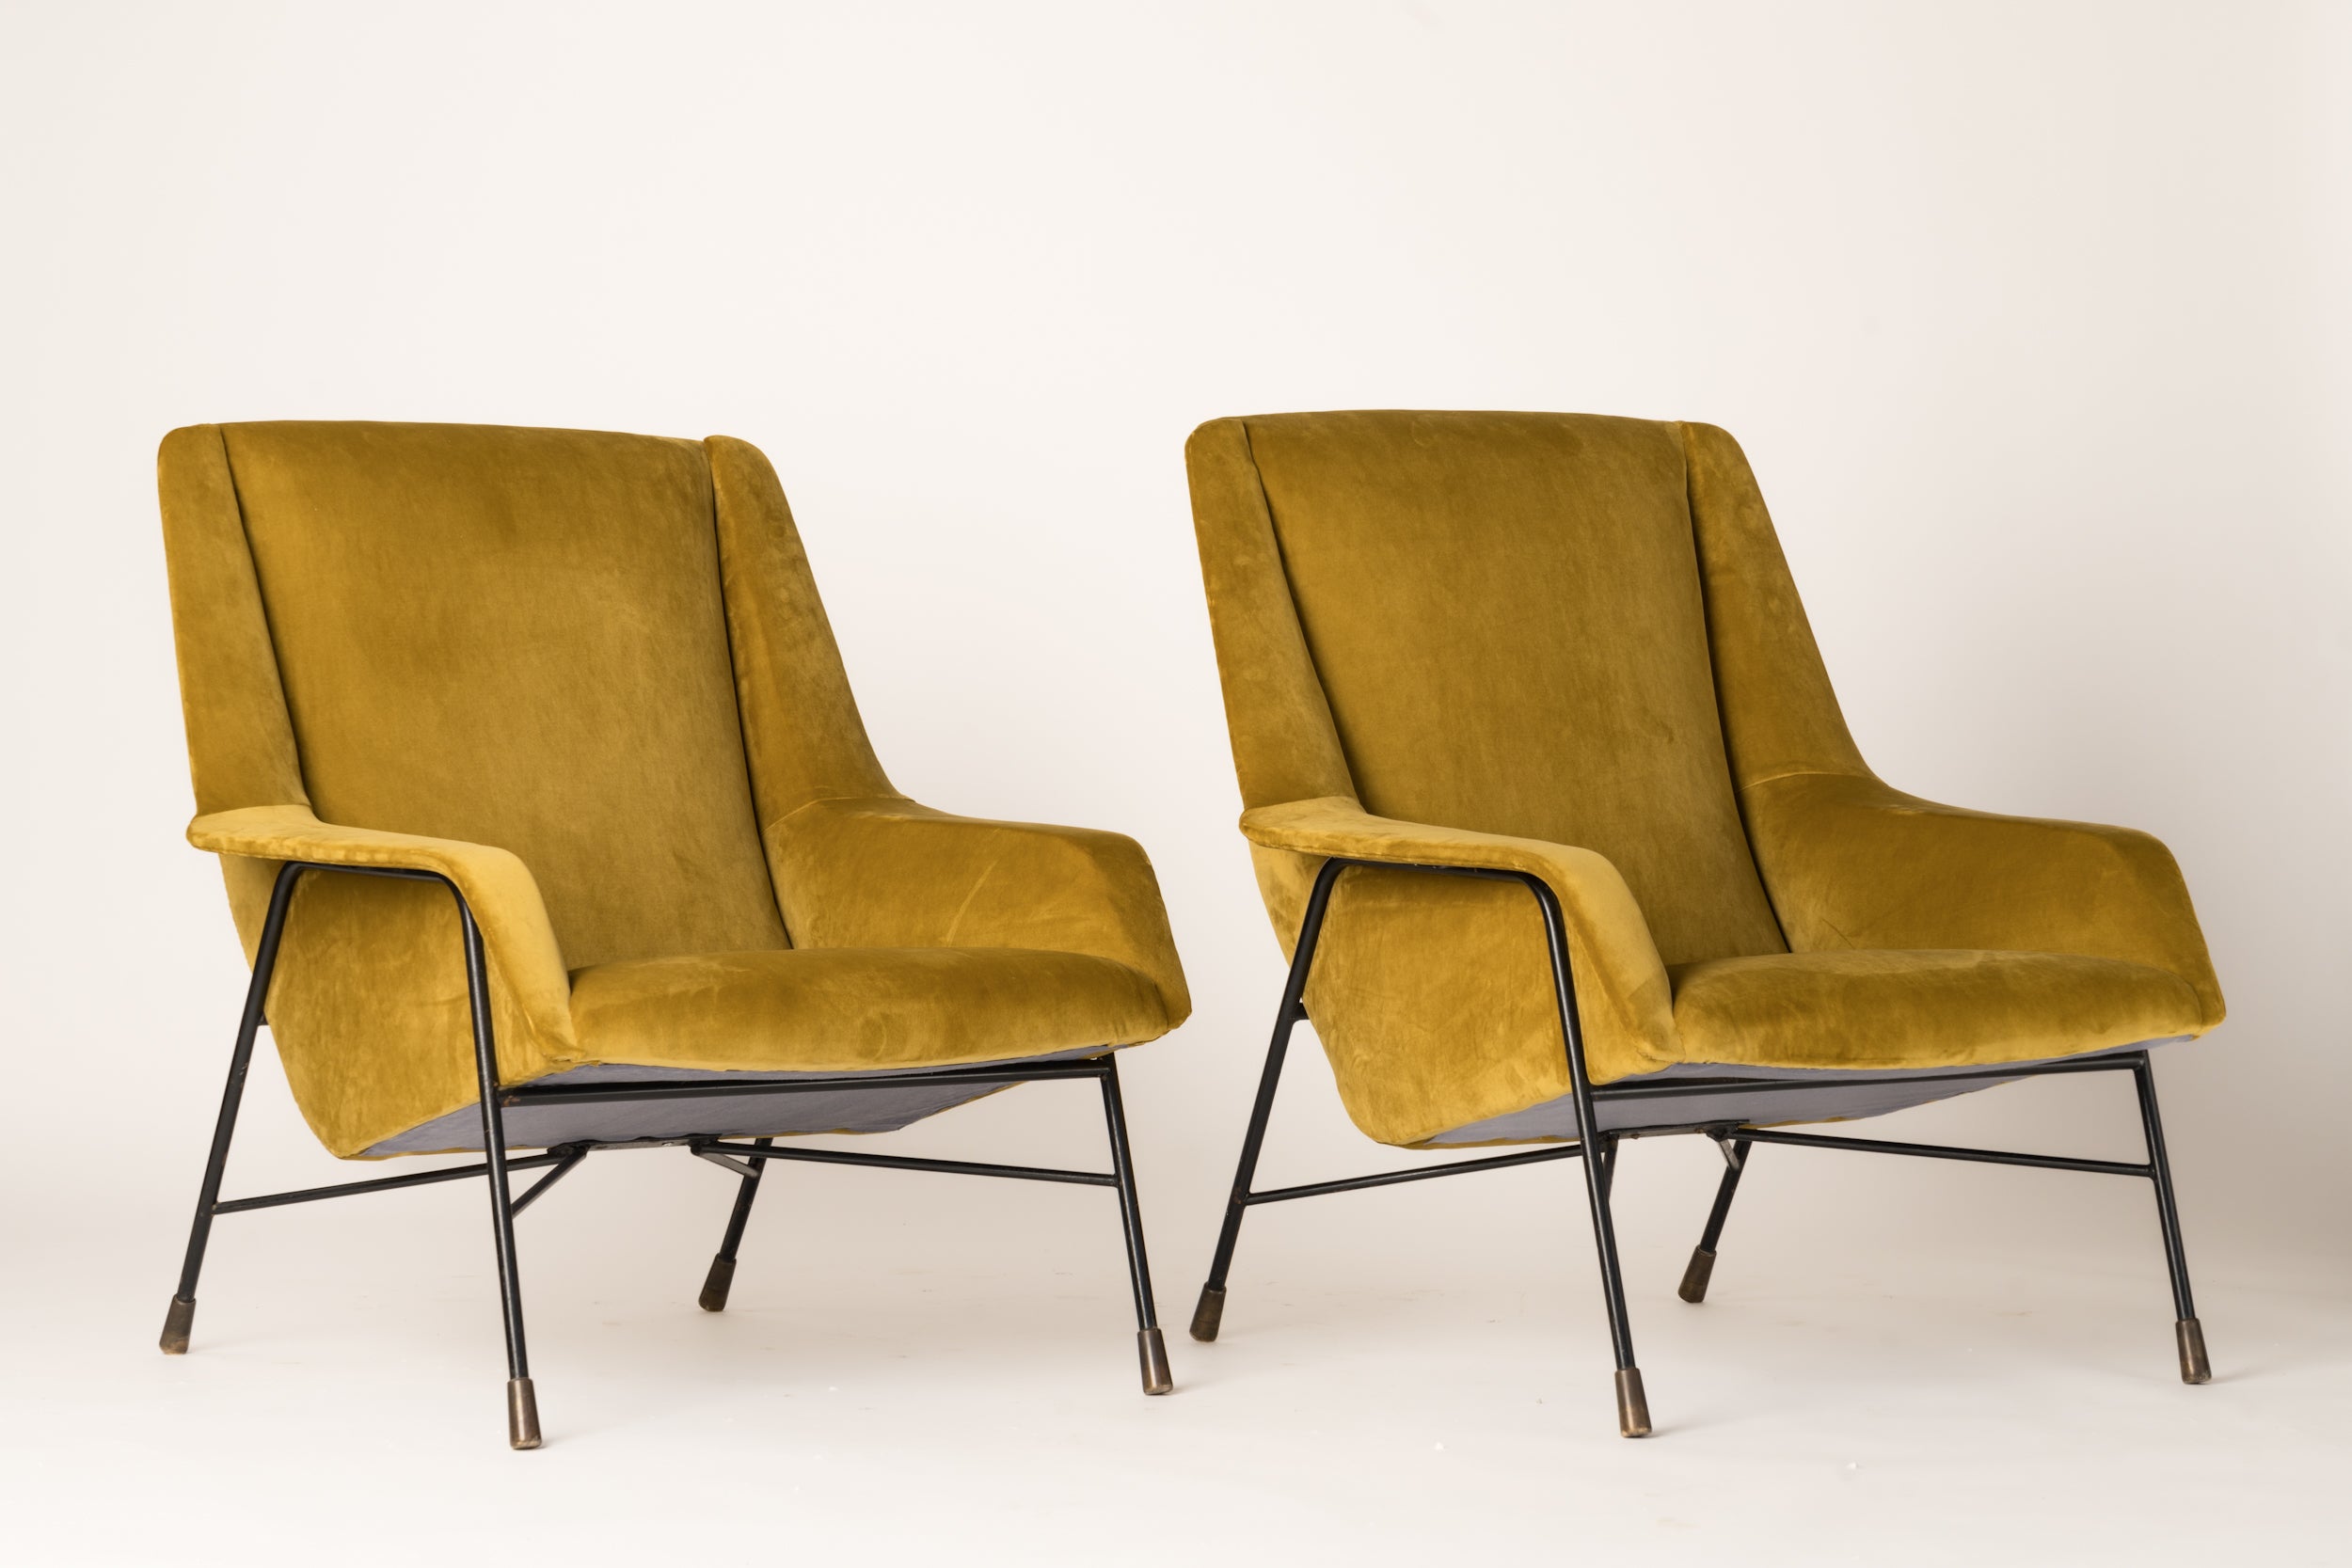 Pair of S12 Armchairs by Alfred Hendrickx for Belform, Belgium, 1958